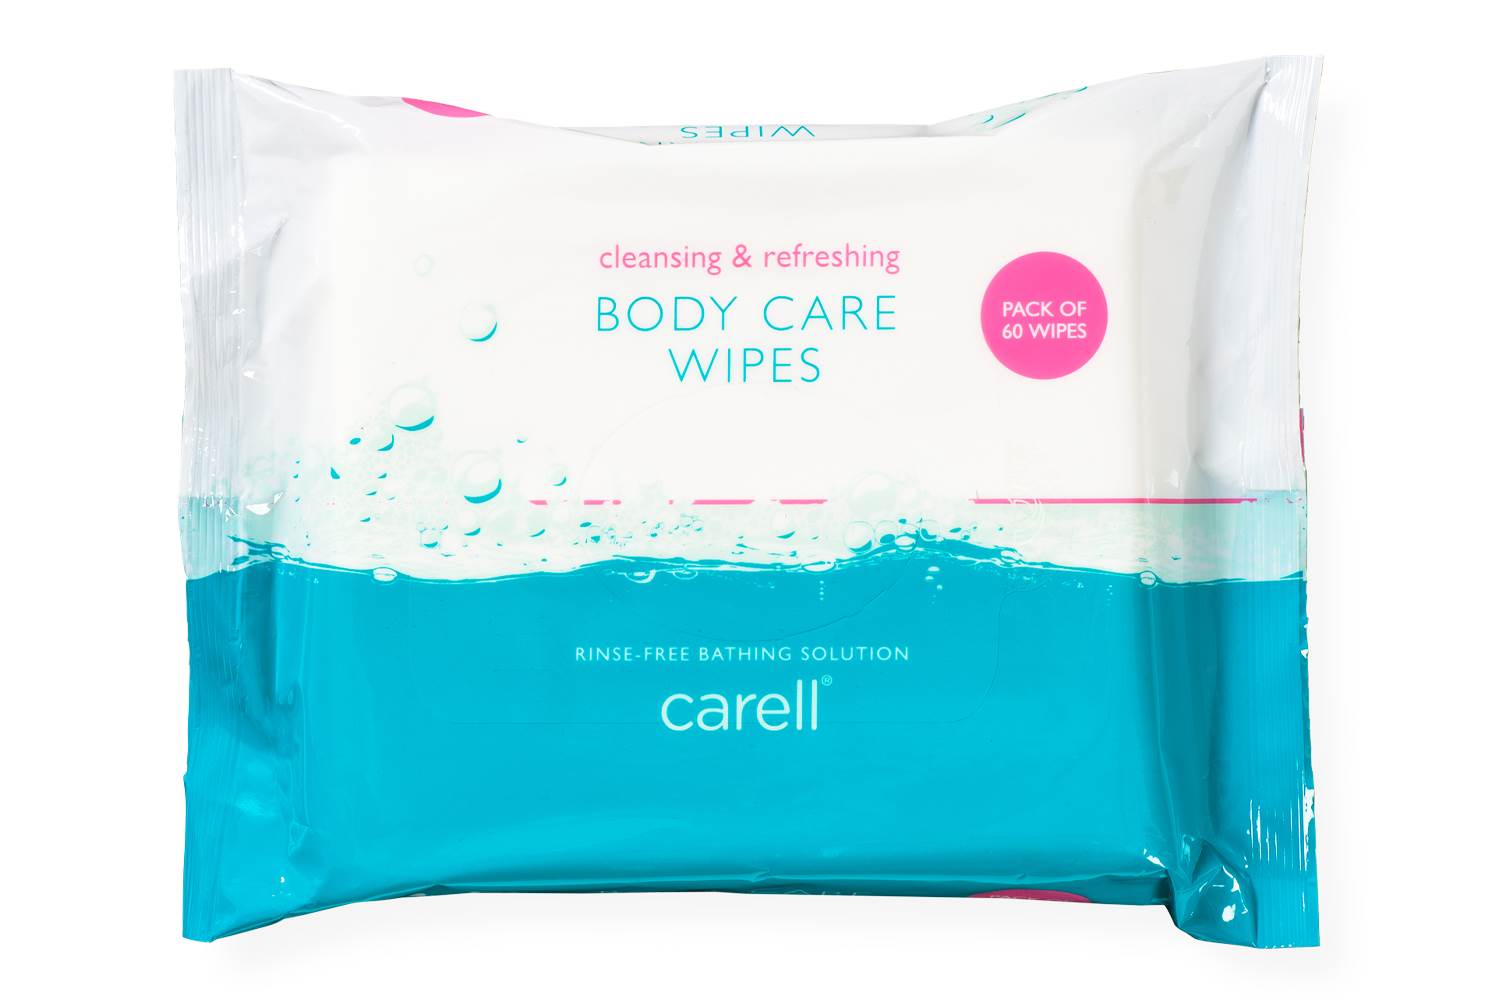 Clinell Carell Body Care Wipes x60